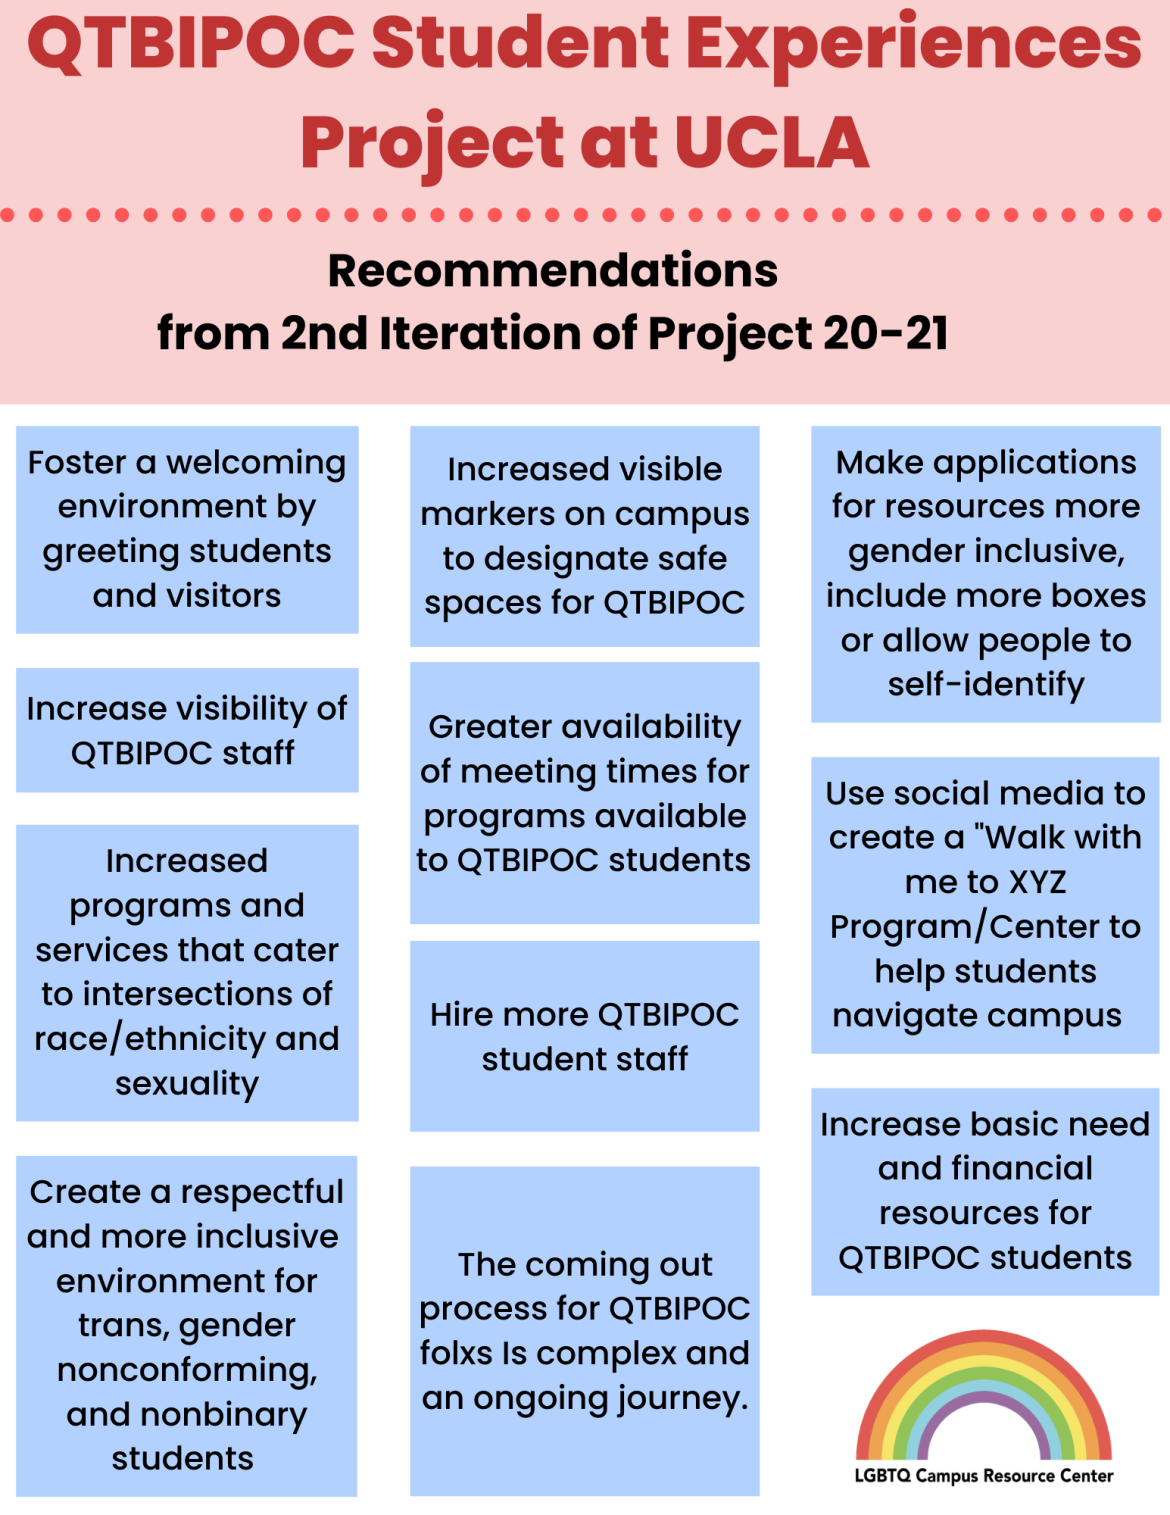 A flyer titled "QTBIPOC Student Experiences Project at UCLA: Recommendations from 2nd Iteration of Project 20-21" The top of the flyer is a red bar with a dotted red line separating the header and subheader. Beneath the red bar are light blue squares, each with a separate recommendation.